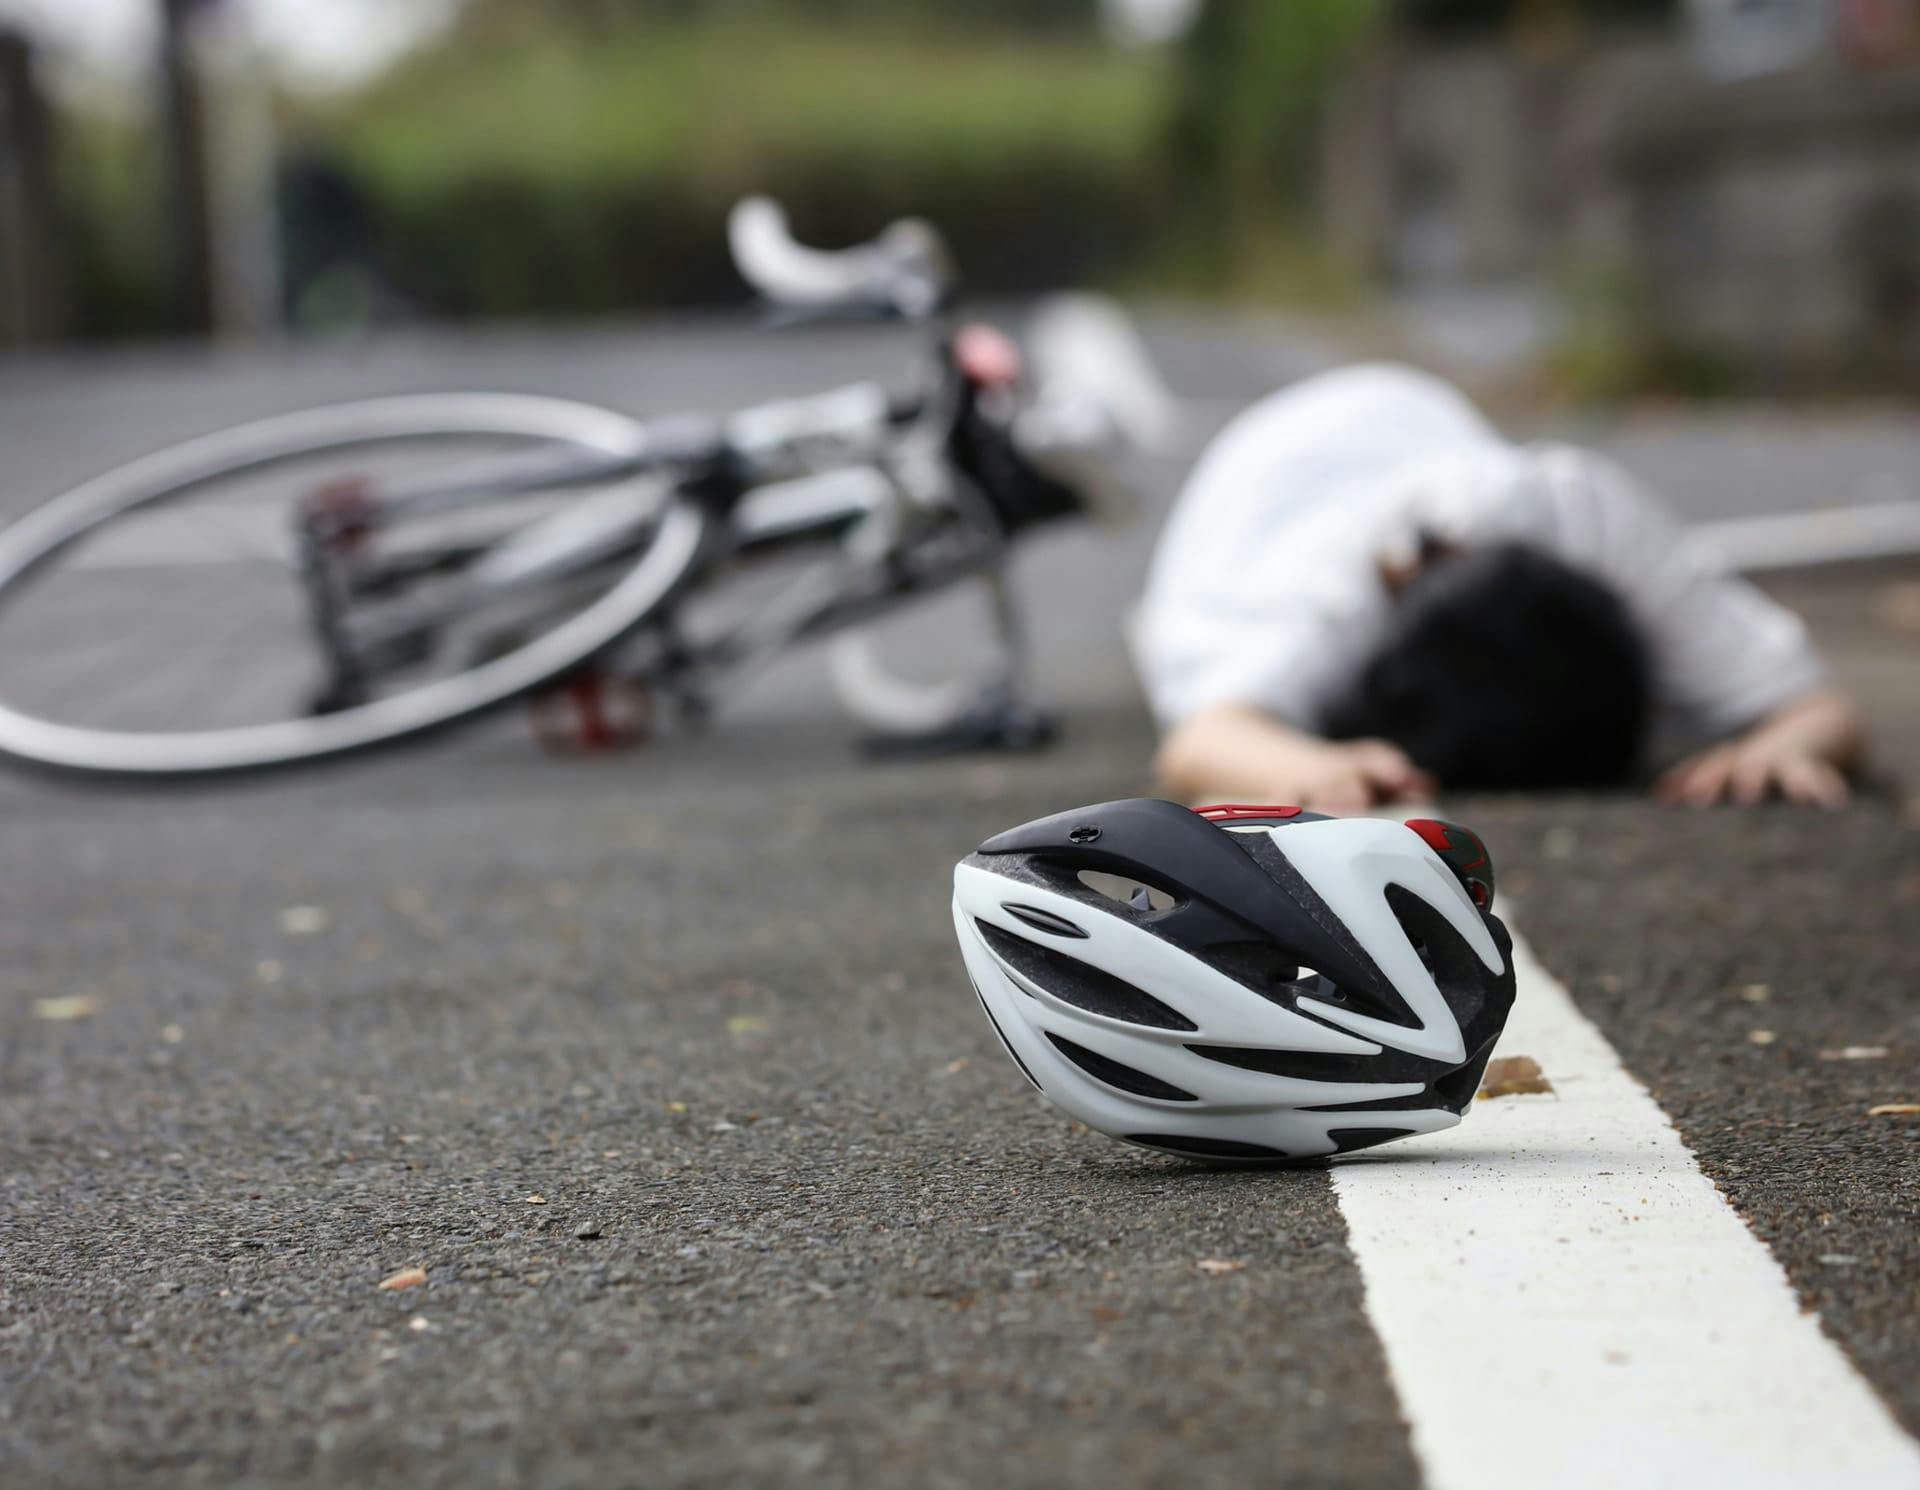 Injured person in bike accident